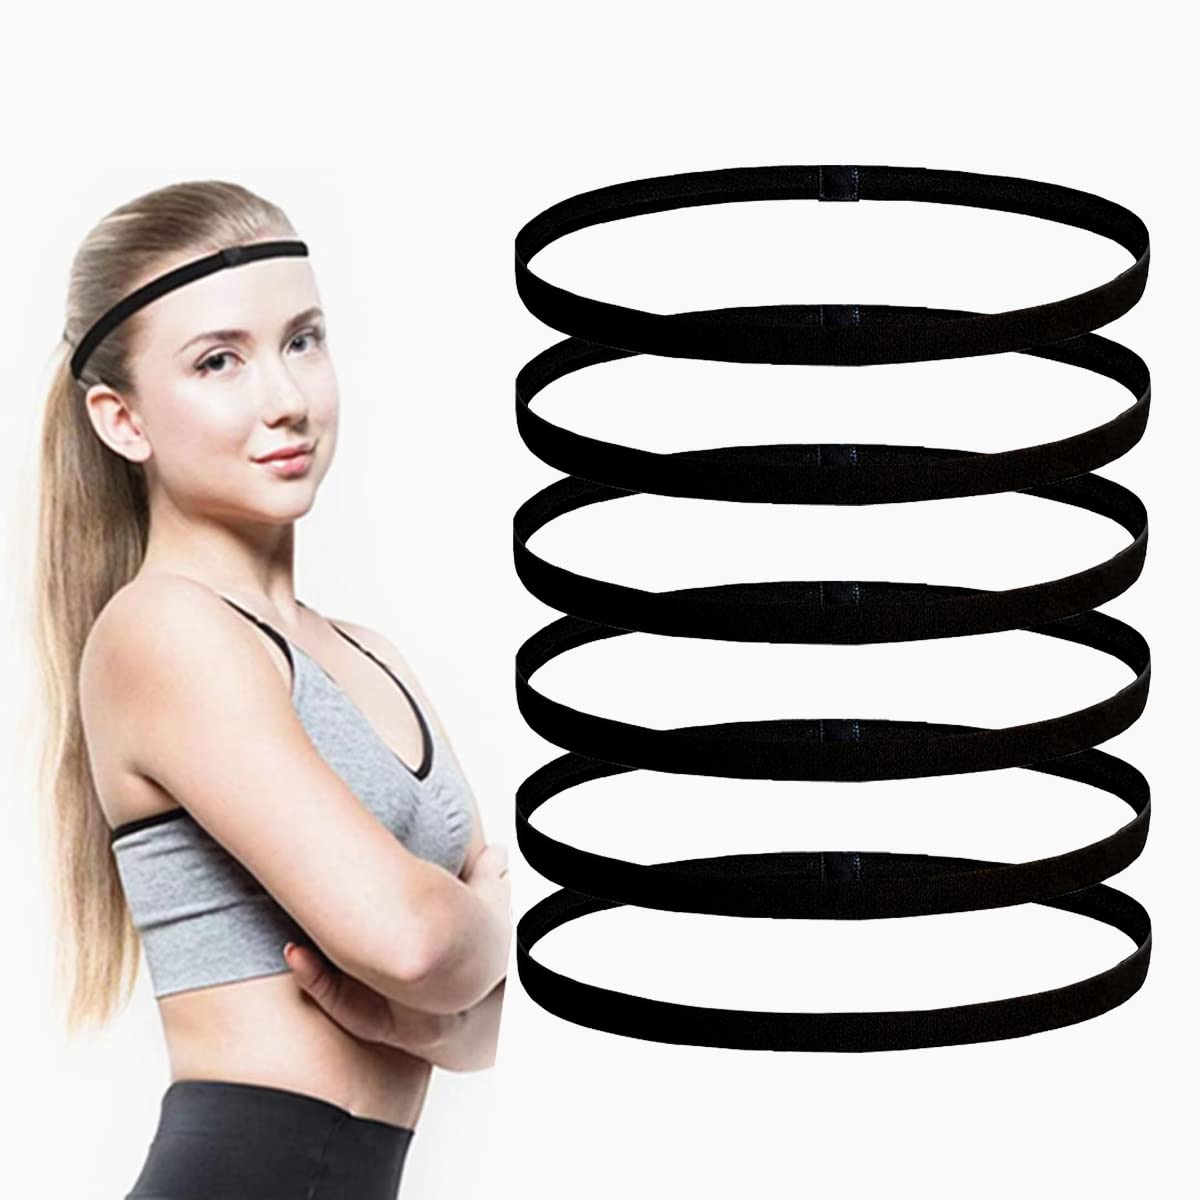 scicent Elastic Bands 6 Pieces Non-Slip Sports Headbands Athletic Exercise Bands Football Hairbands Silicone Grip Hair Bands Mini Sweatband Black - 066